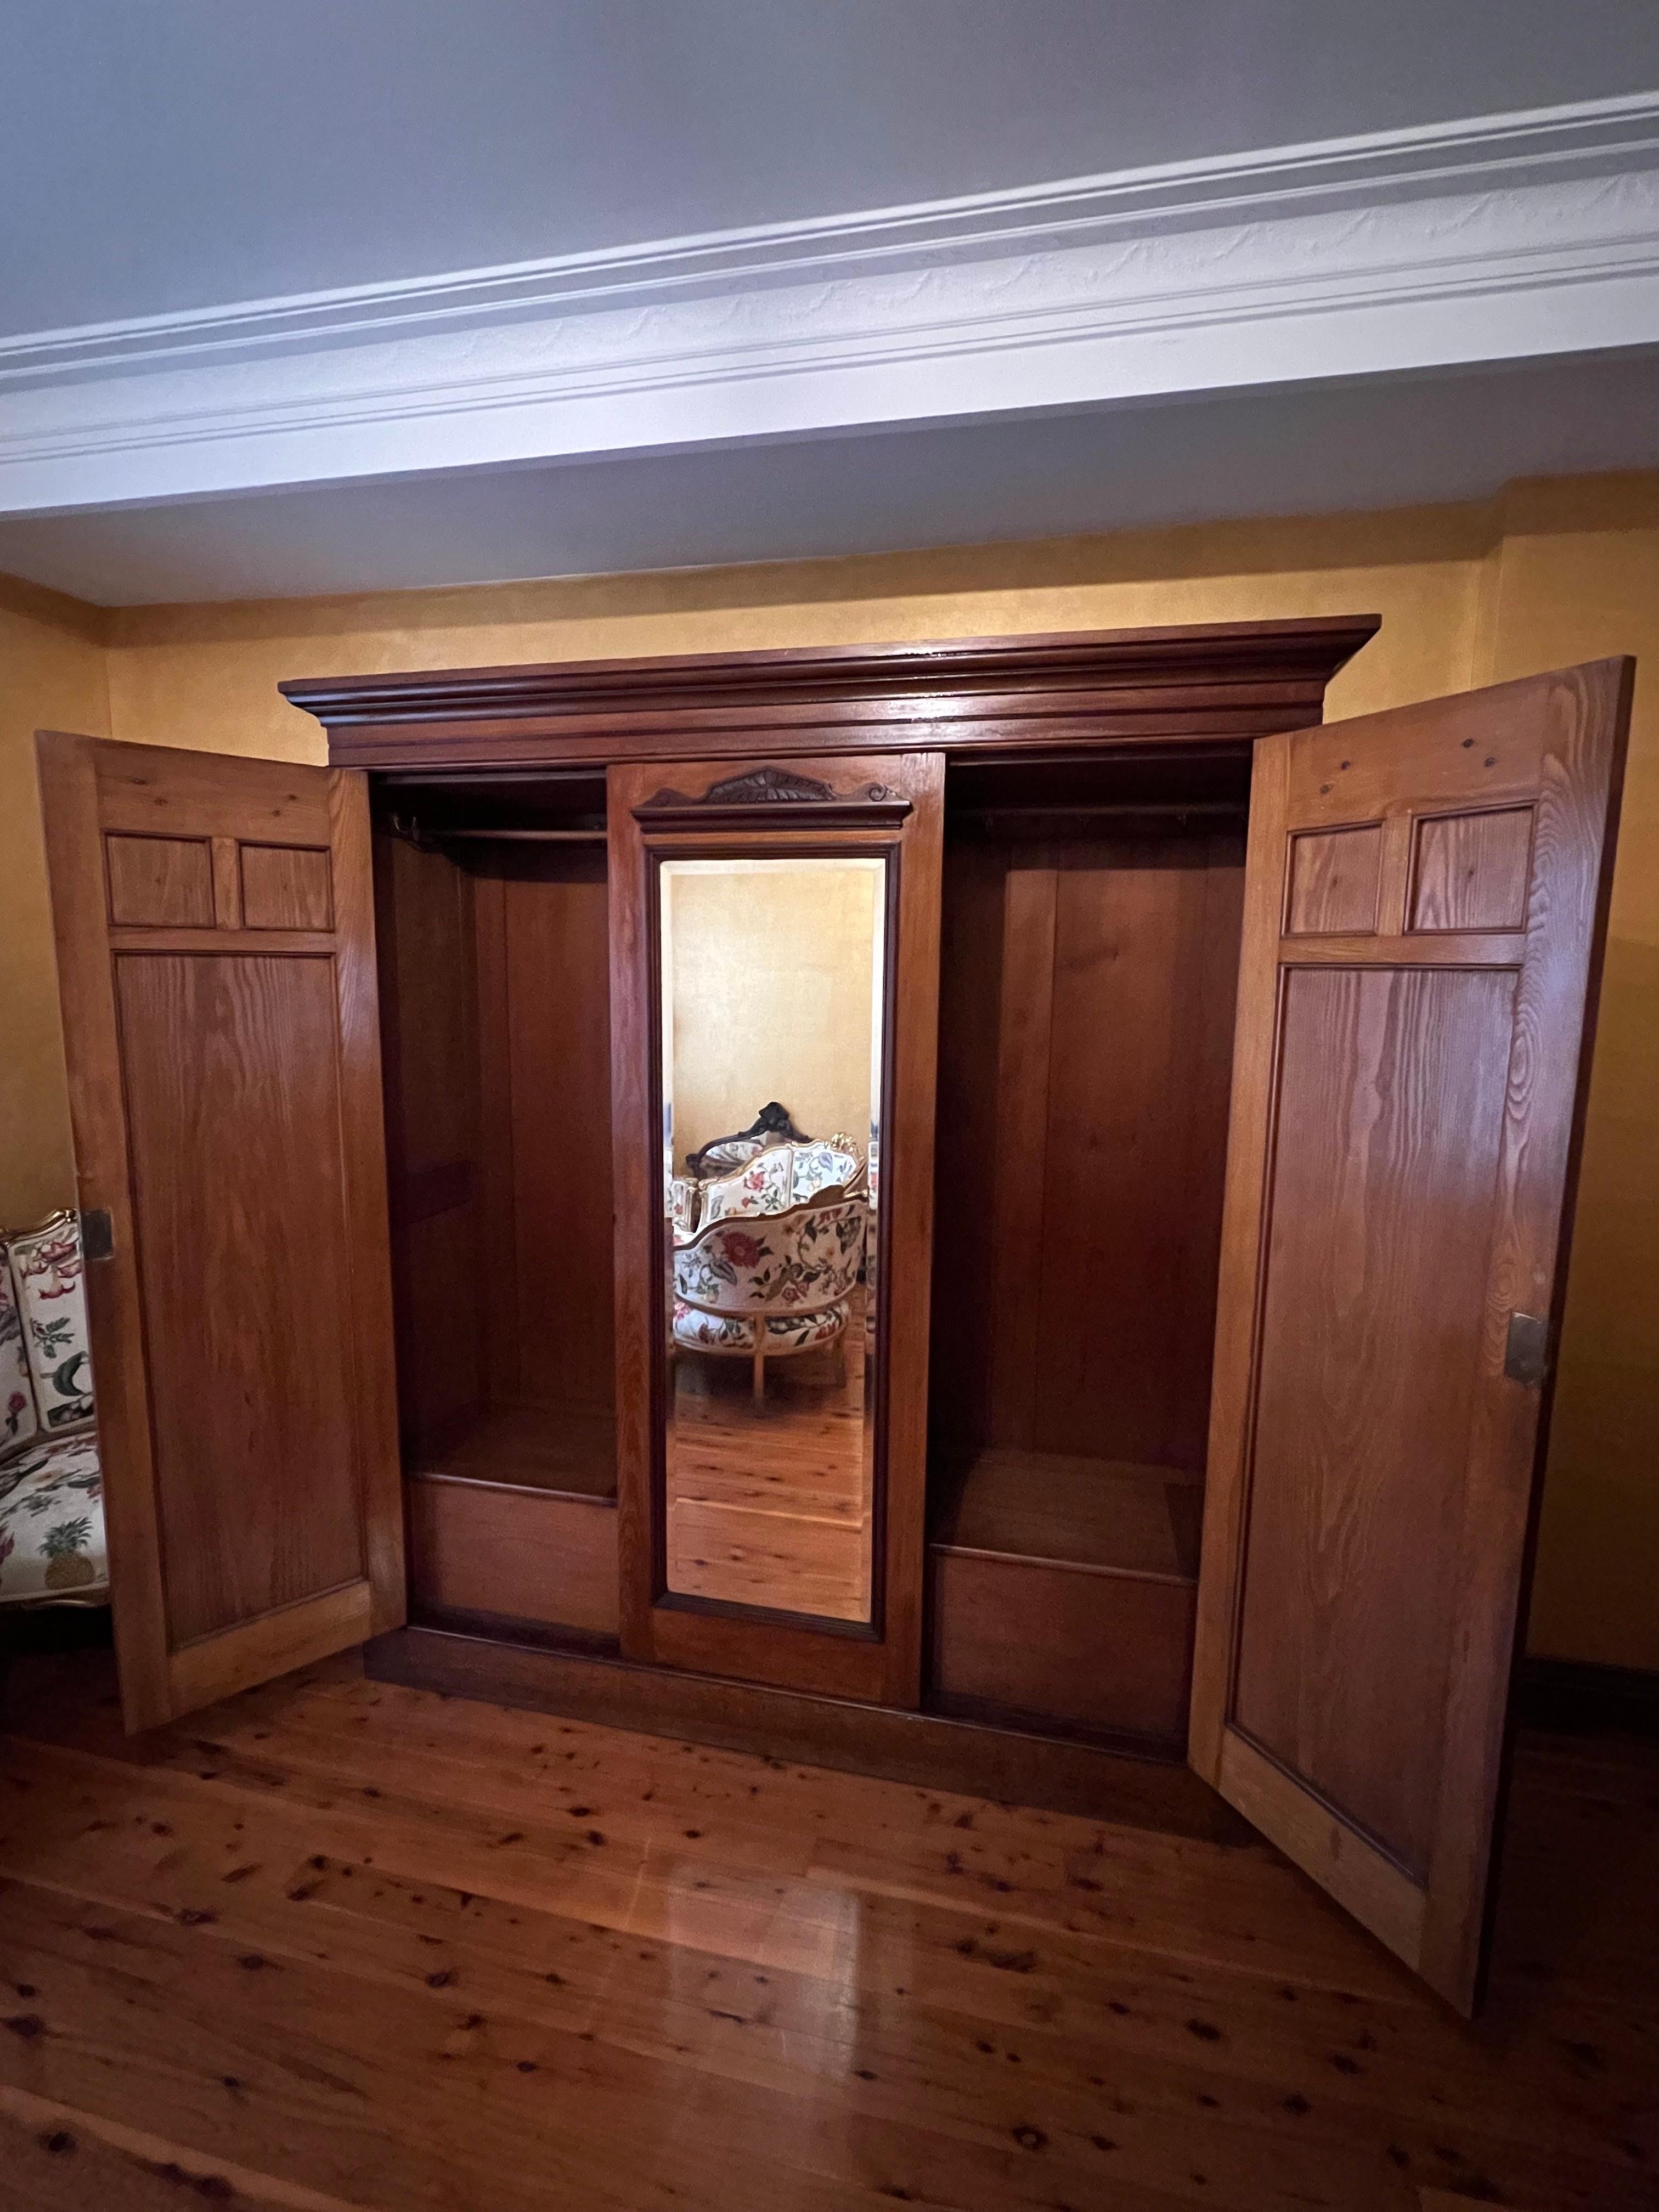 Both sides of cupboard are hanging racks with tow doors and centre mirror, open door cupboards on the base of the cupboard, comes with keys, comes apart in smaller pieces for easer transport. Has makers stamped of Anthony Hordens & Sons. 

Circa: